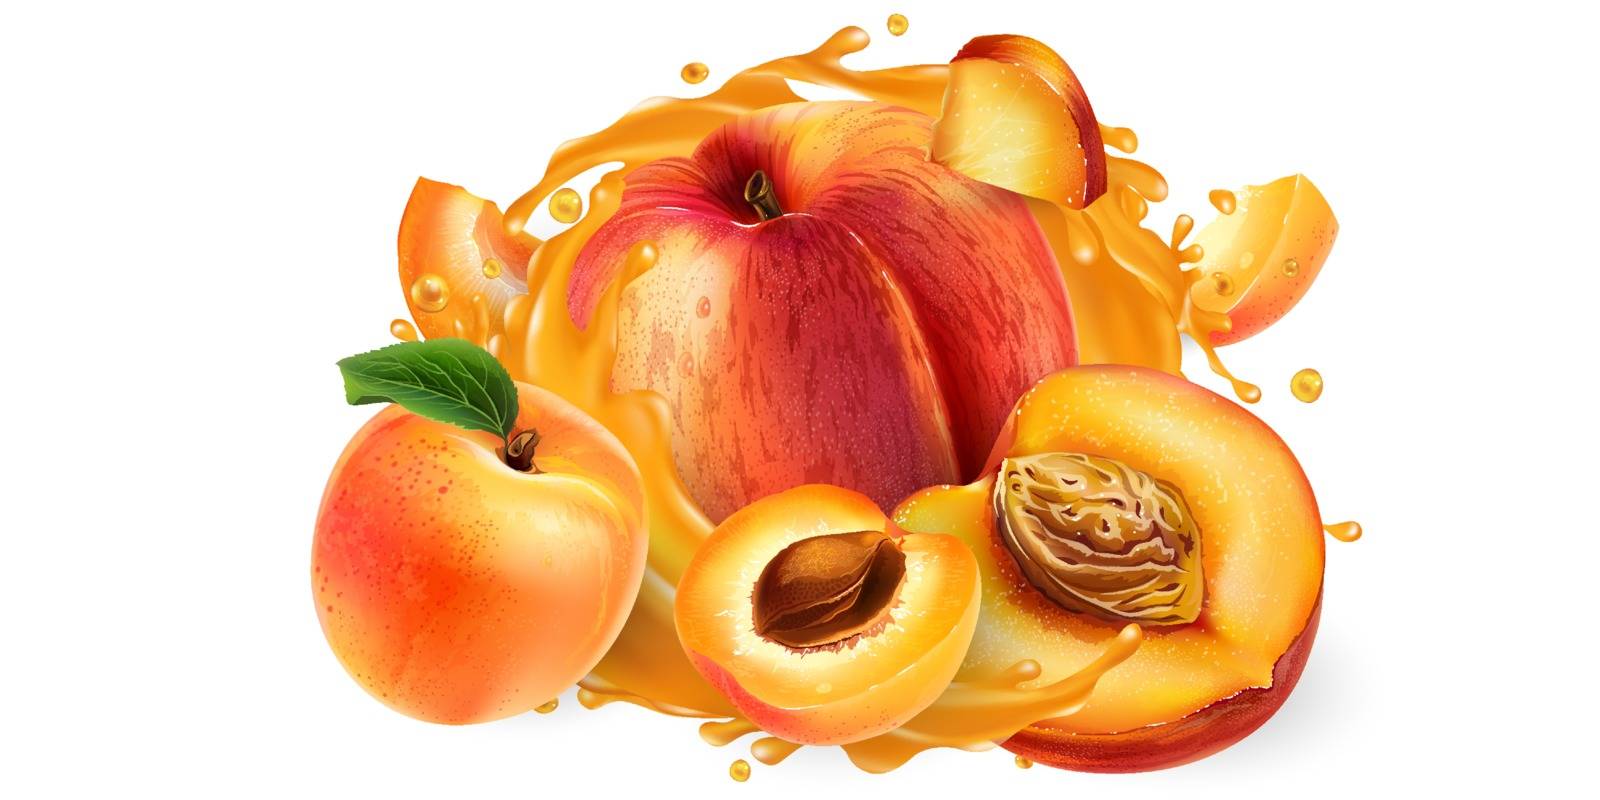 Whole and sliced peaches and apricots in a juice splash. by ConceptCafe